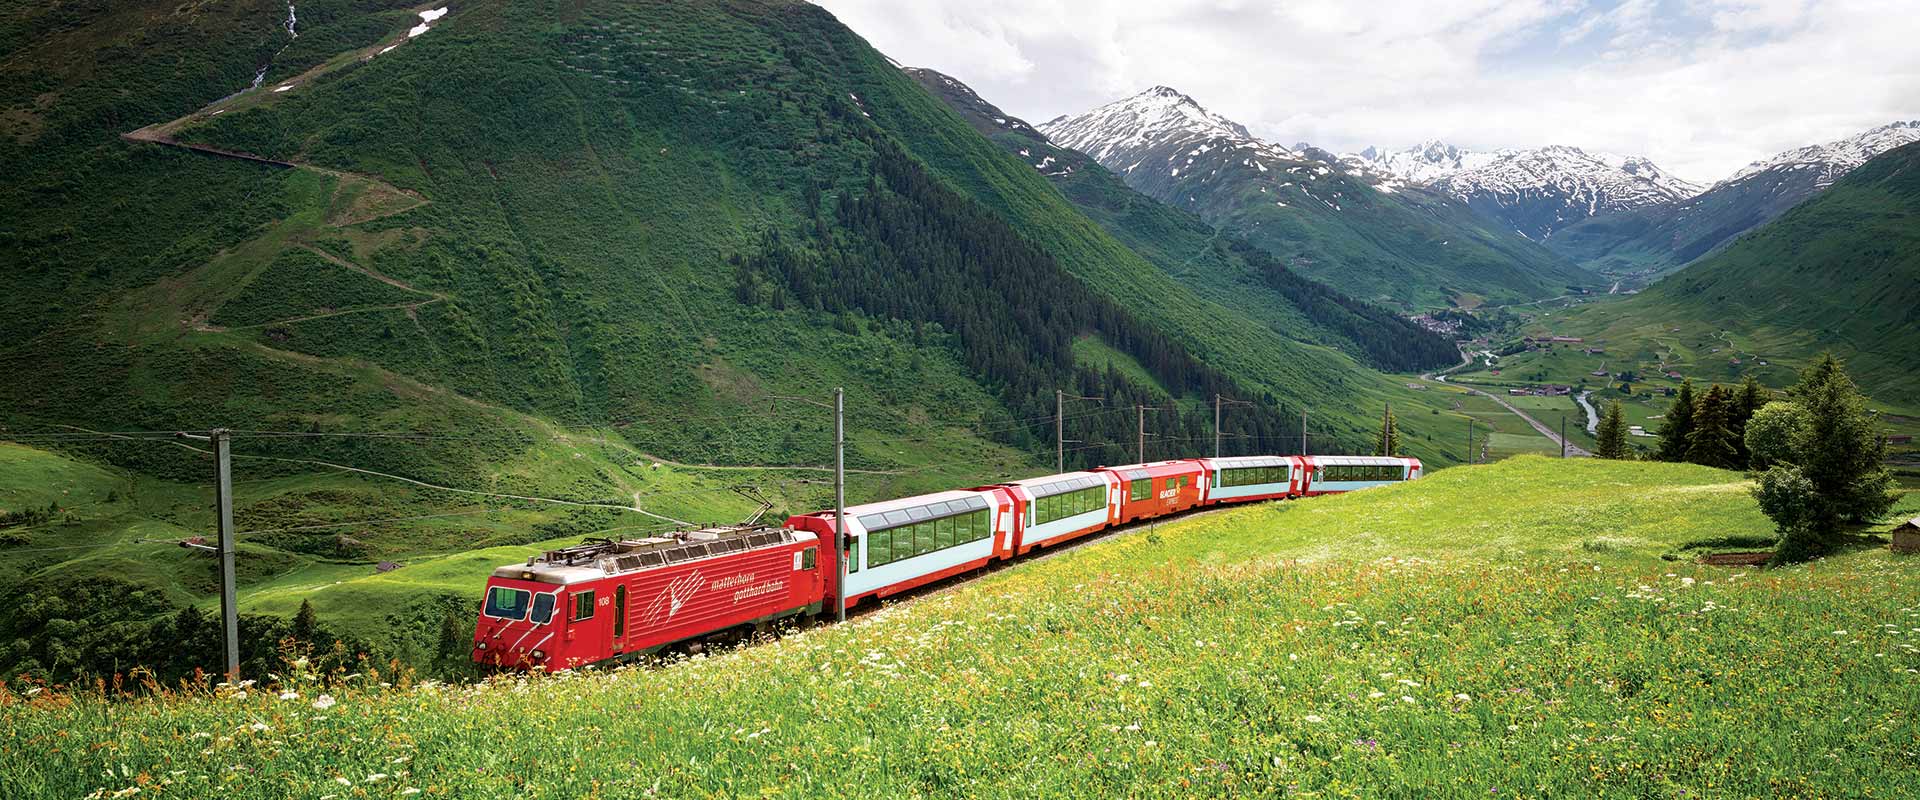 Red train in green pastures with snow capped mountains in background